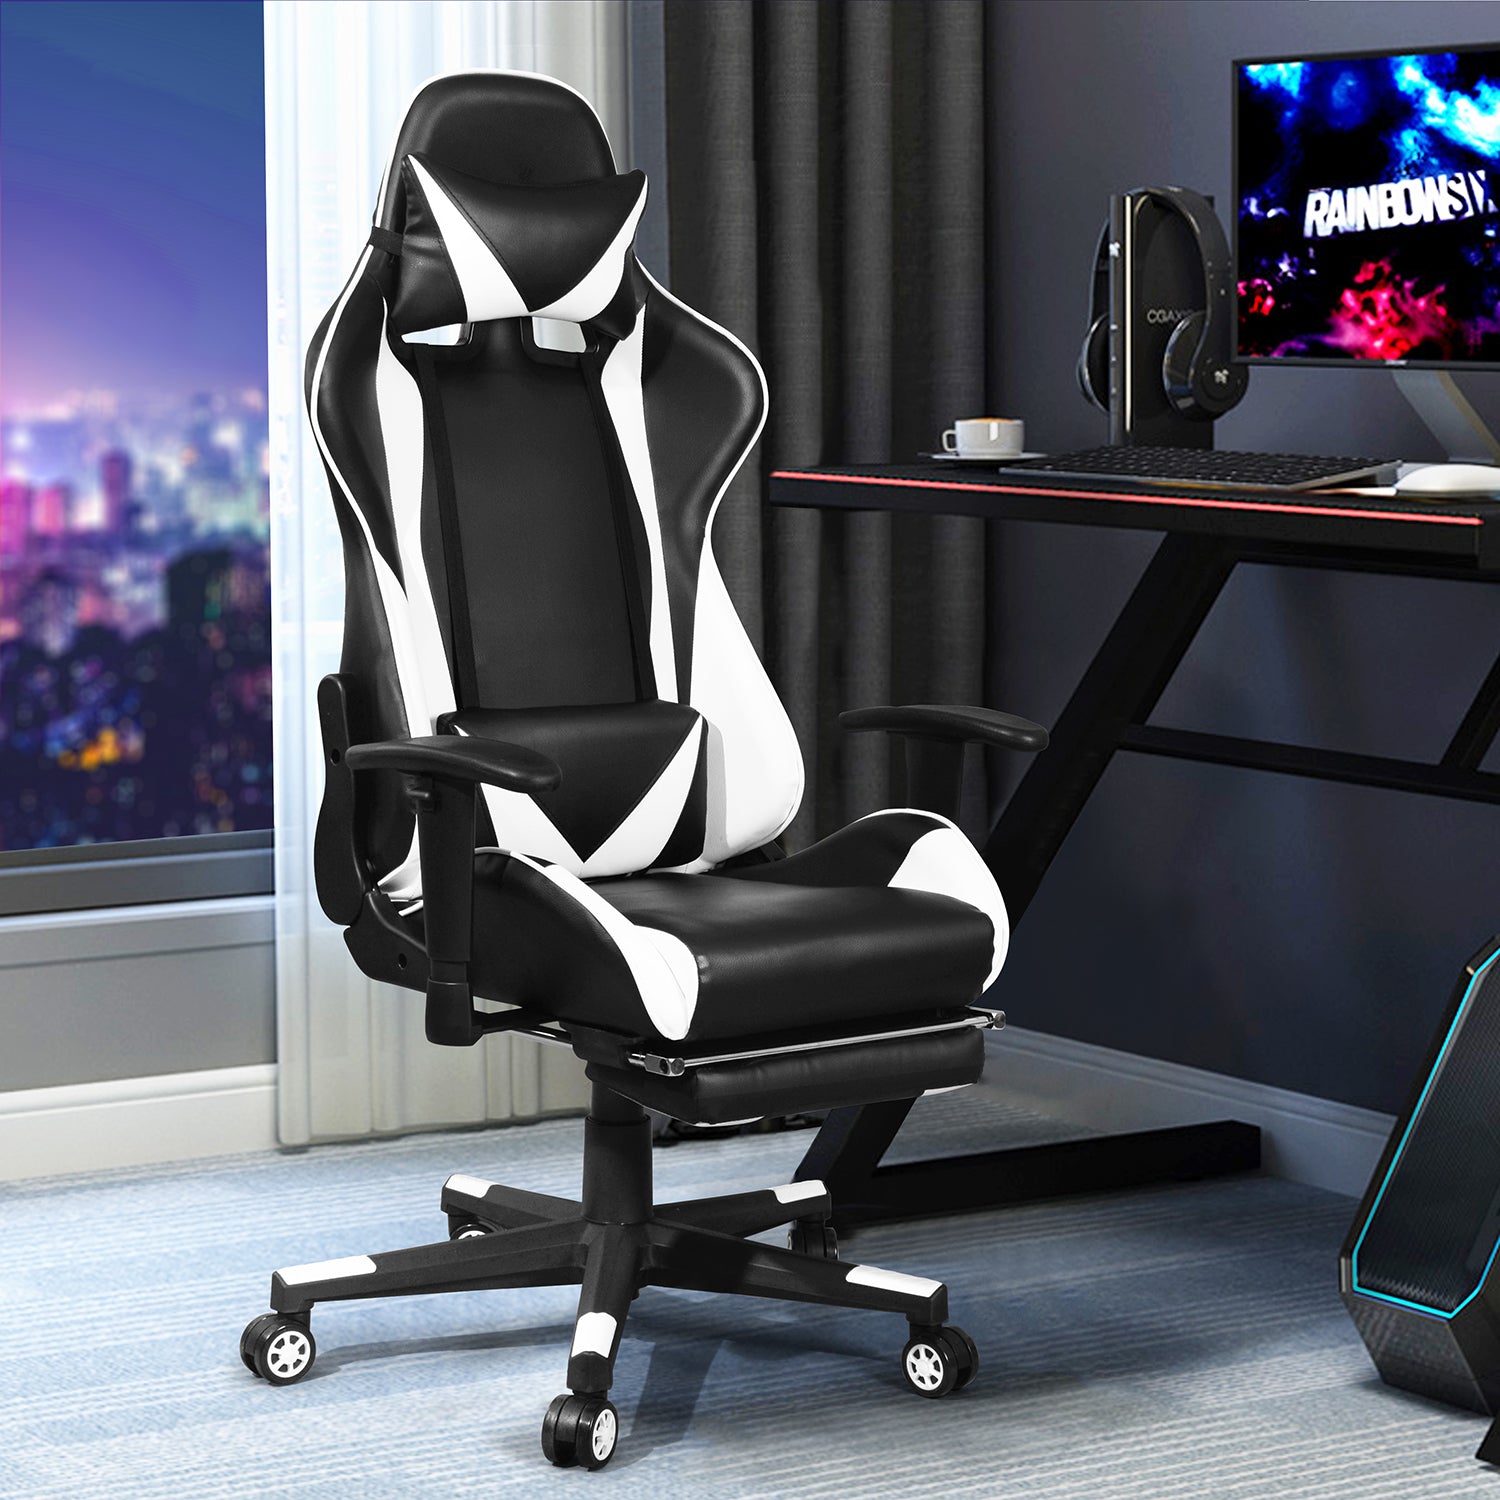 Comfortable Ergonomic Designer Gaming Office Chair with Armrests, 360 Degree Swivel, Reclining Function with Footrest - GORDAN